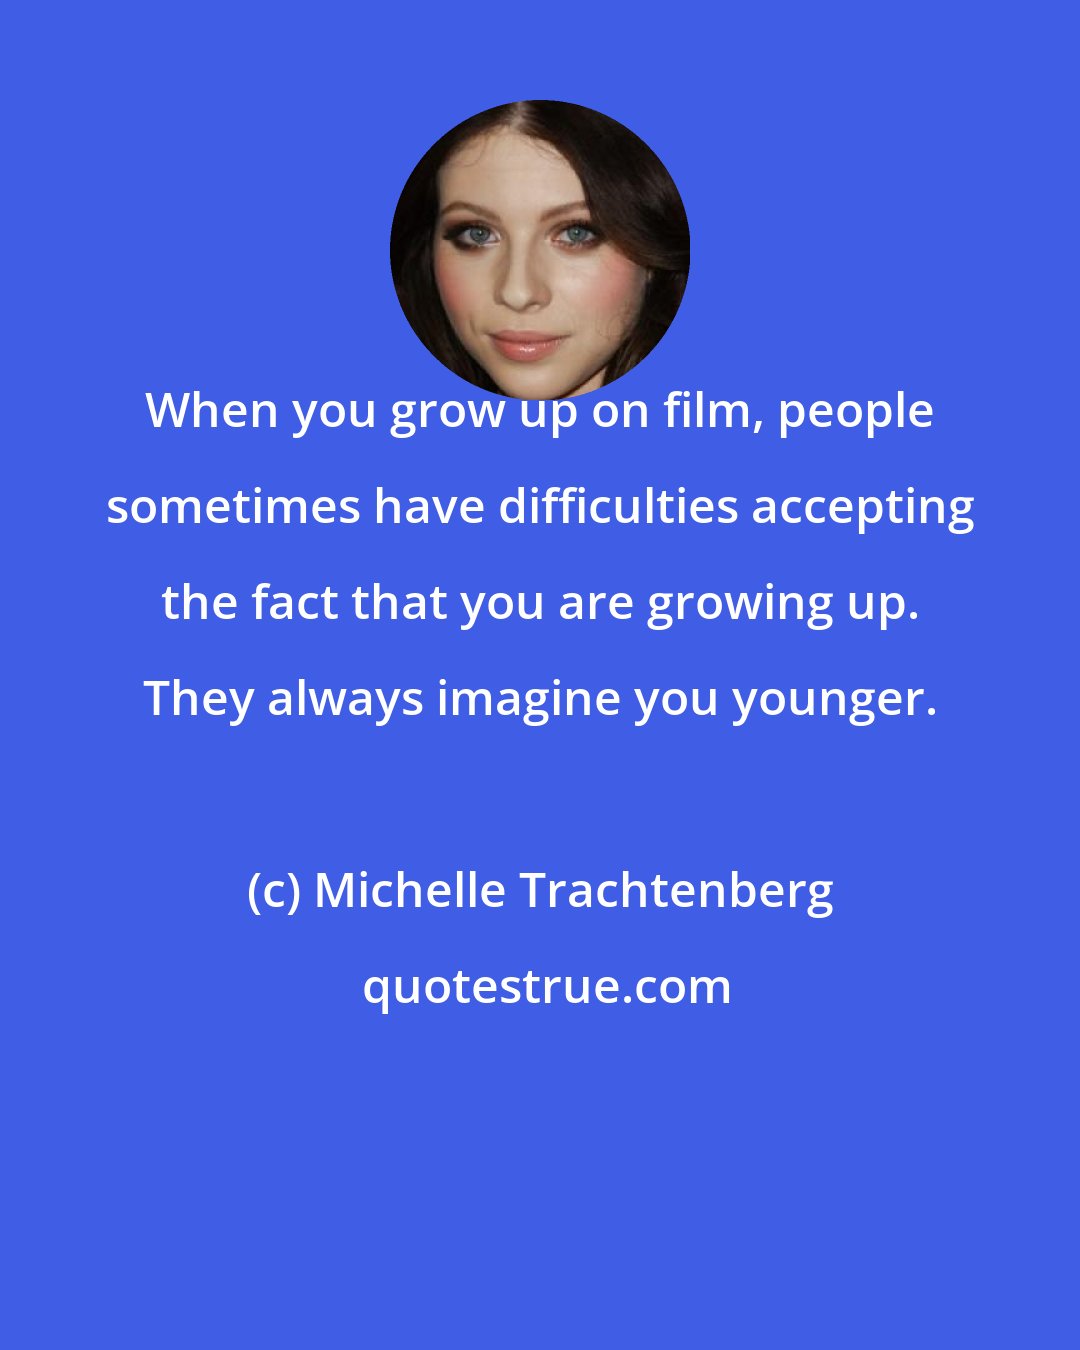 Michelle Trachtenberg: When you grow up on film, people sometimes have difficulties accepting the fact that you are growing up. They always imagine you younger.